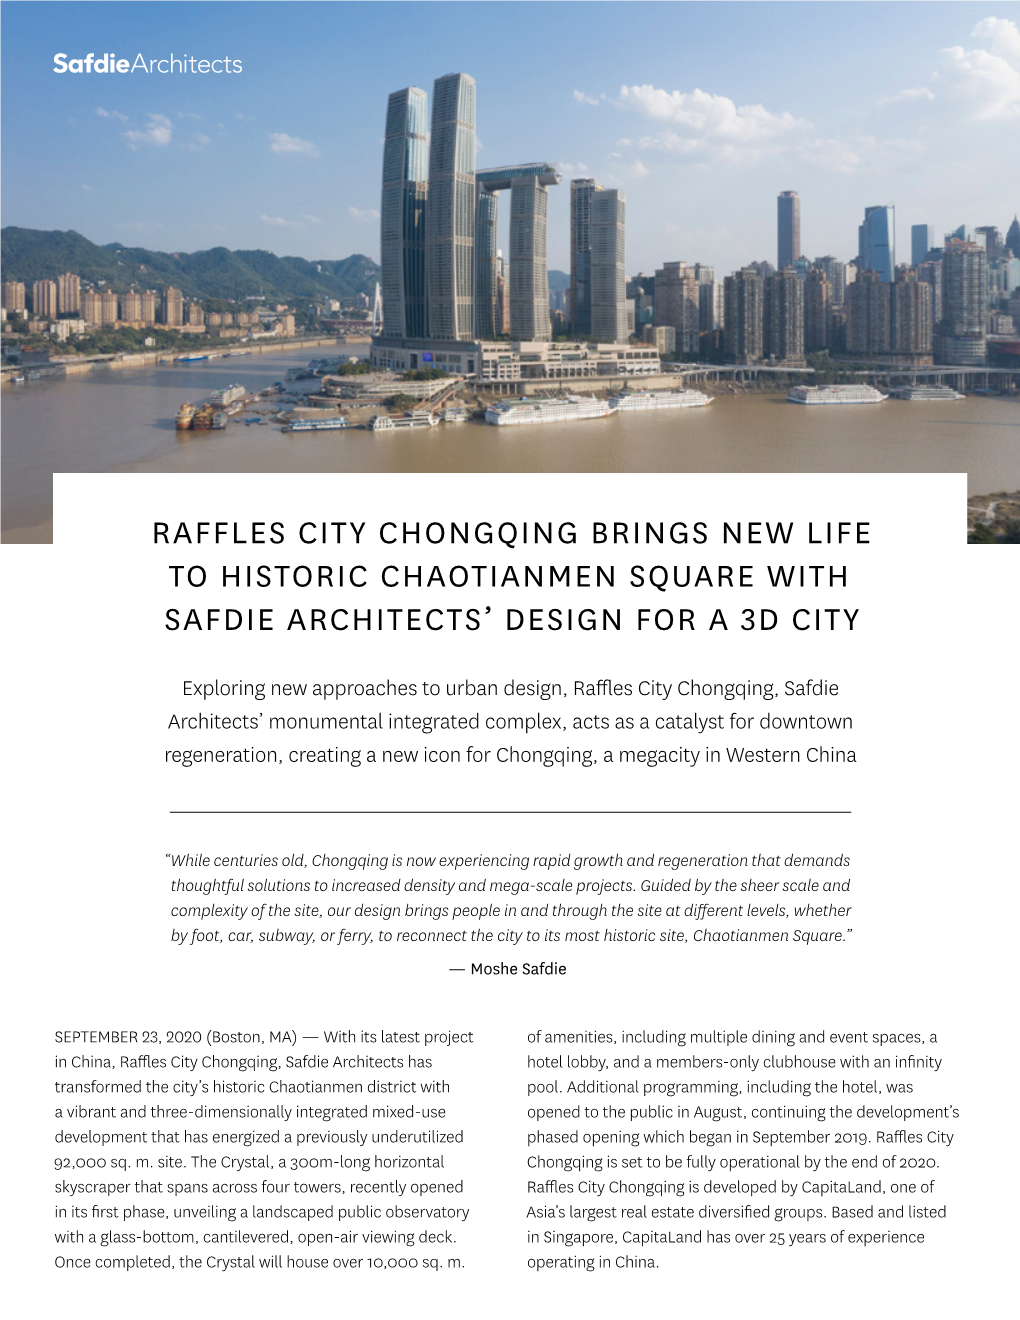 Raffles City Chongqing Brings New Life to Historic Chaotianmen Square with Safdie Architects’ Design for a 3D City